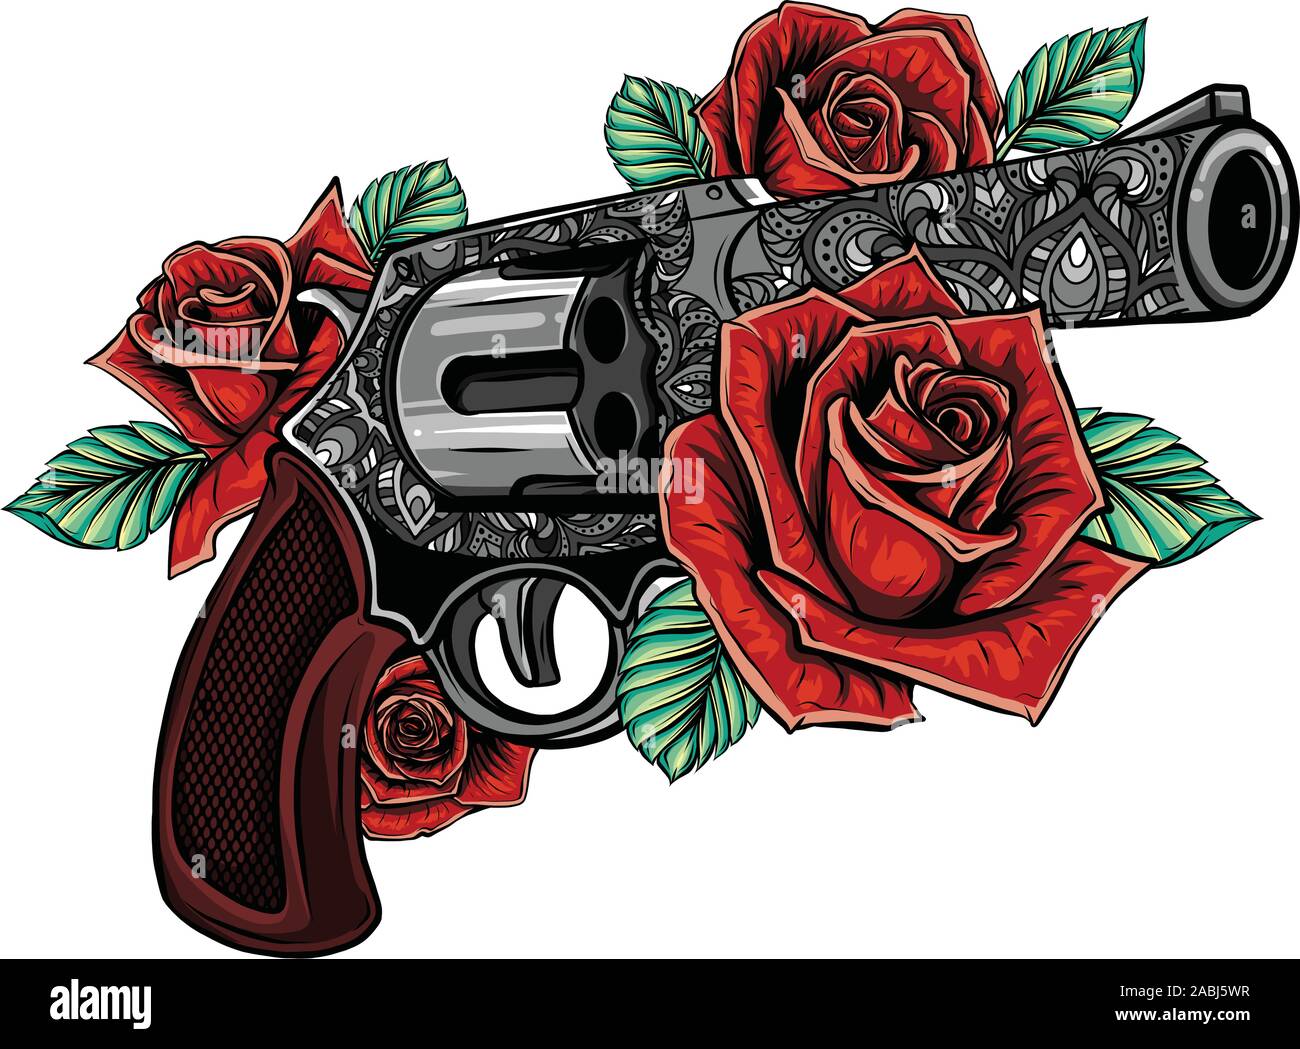 73 Stunning Gun Tattoo Ideas That You Cant Afford To Miss  Psycho Tats